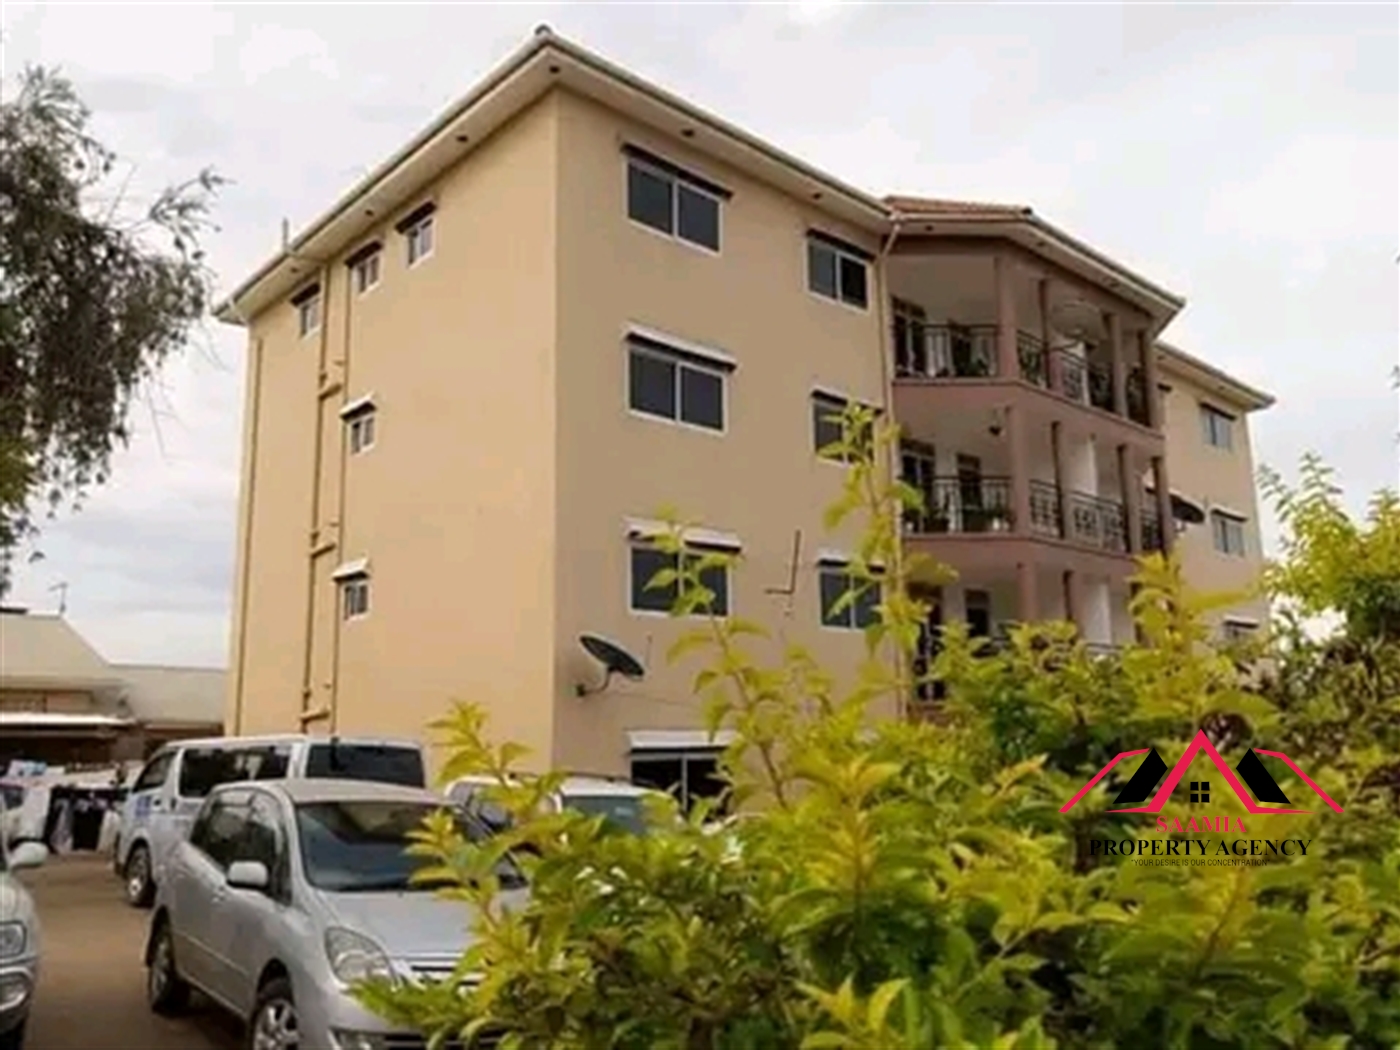 Apartment for rent in Mutungo Wakiso